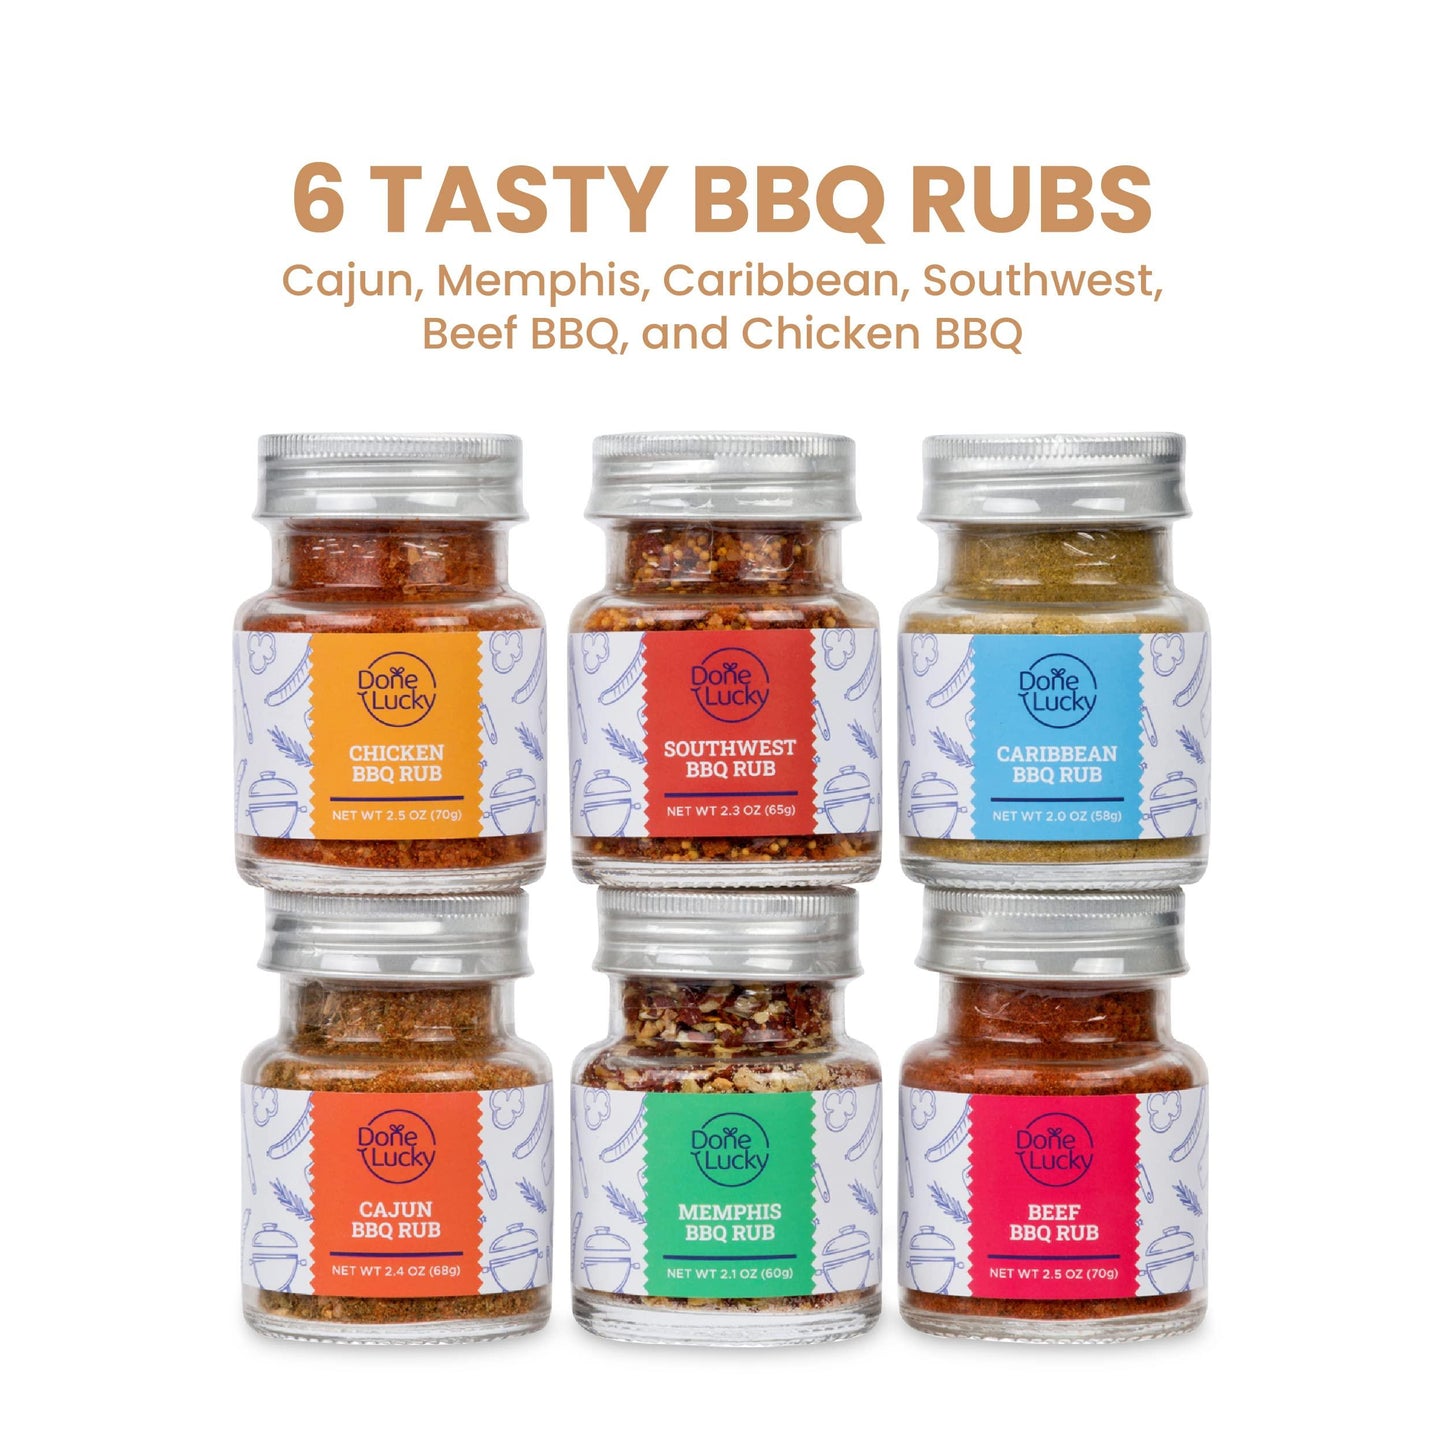 BBQ Rub Gift Set - Spice Gift Set in Premium Wooden Box - Great Grilling Gift for Christmas, Birthday, Father's Day for Him, Dad, Men, or Her - Unique Barbecue Seasonings (Set of 6) - CookCave